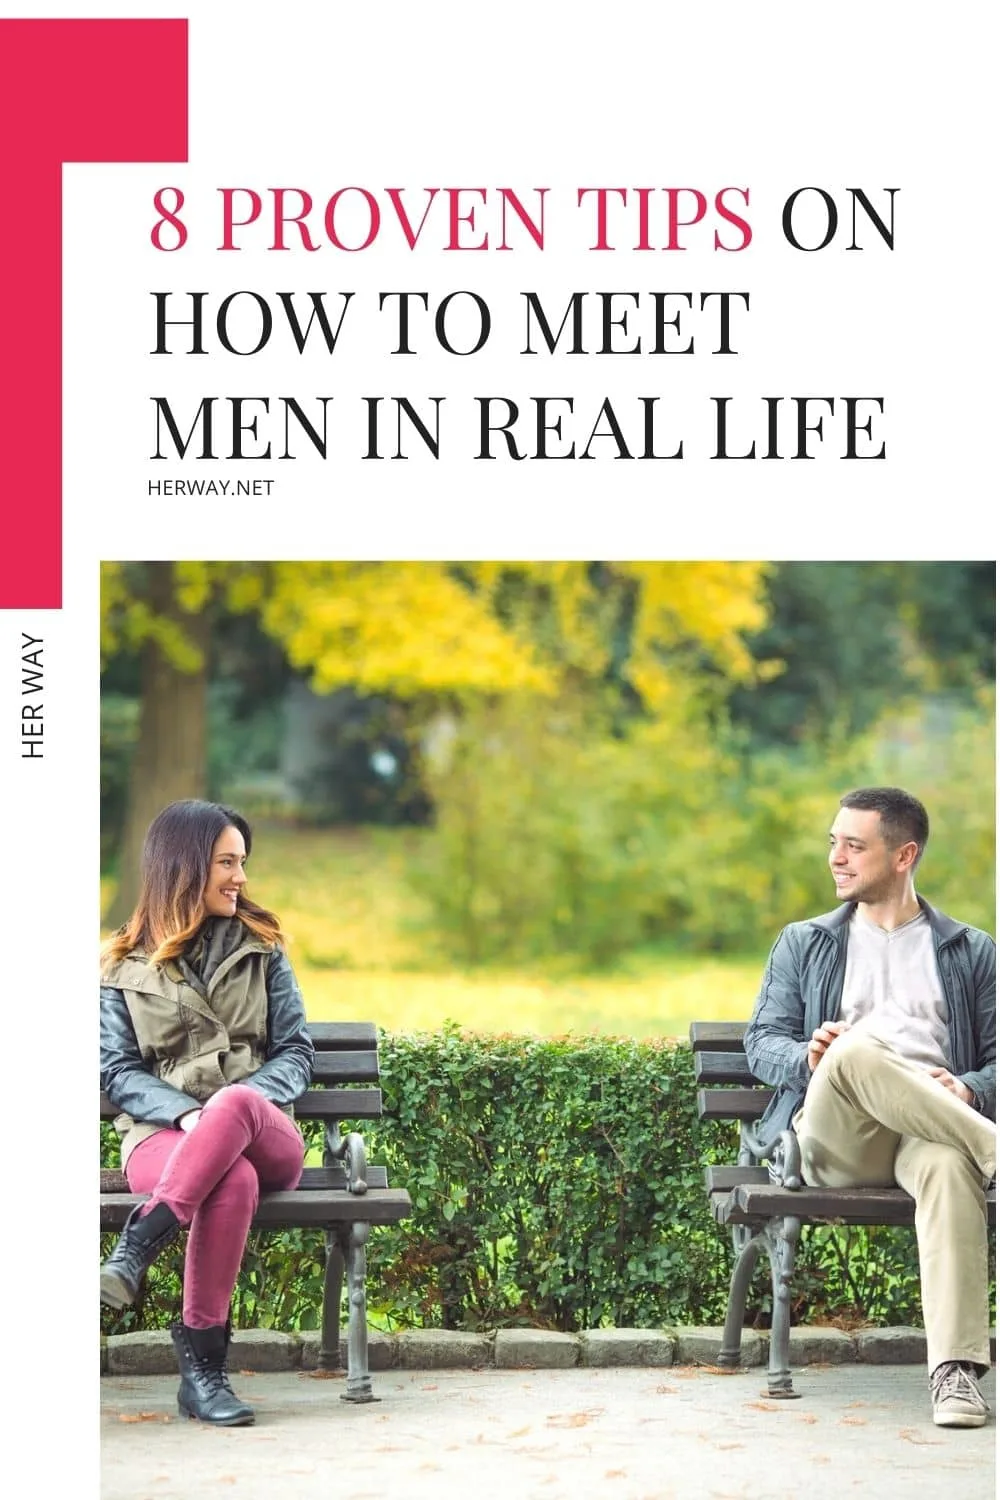 8 Proven Tips On How To Meet Men In Real Life